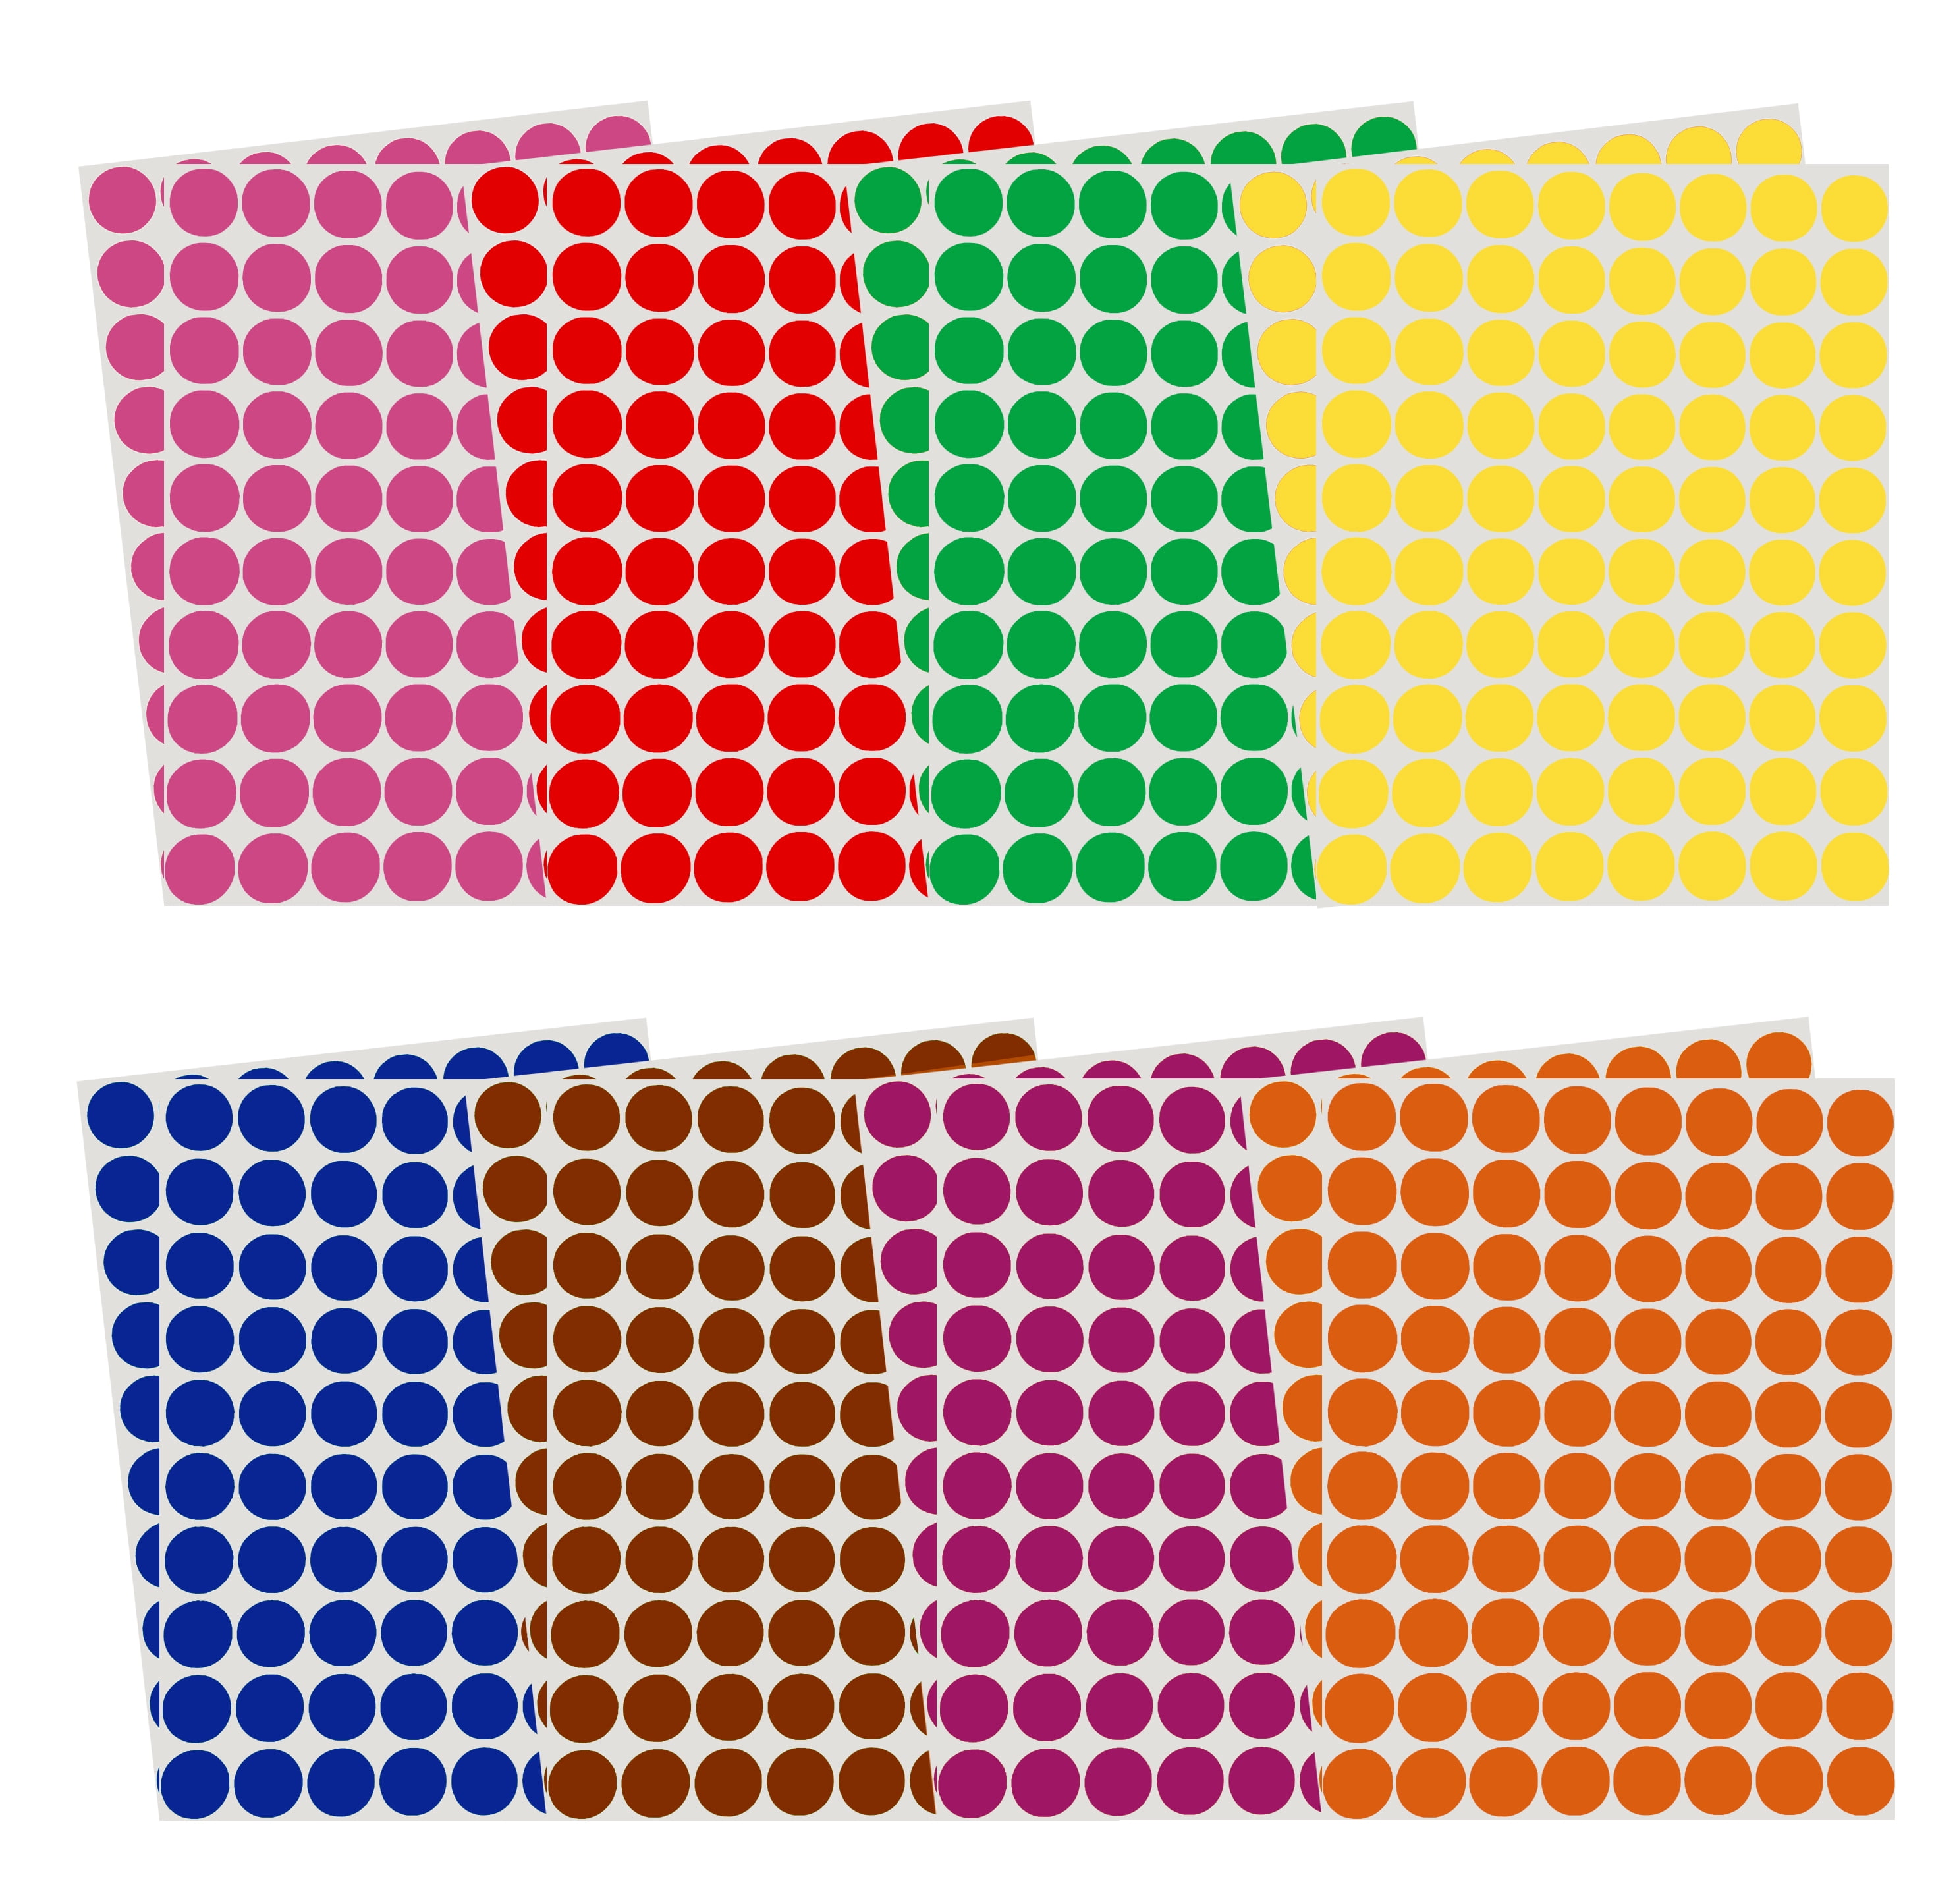 Colour Code Rectangles 10 x 20mm